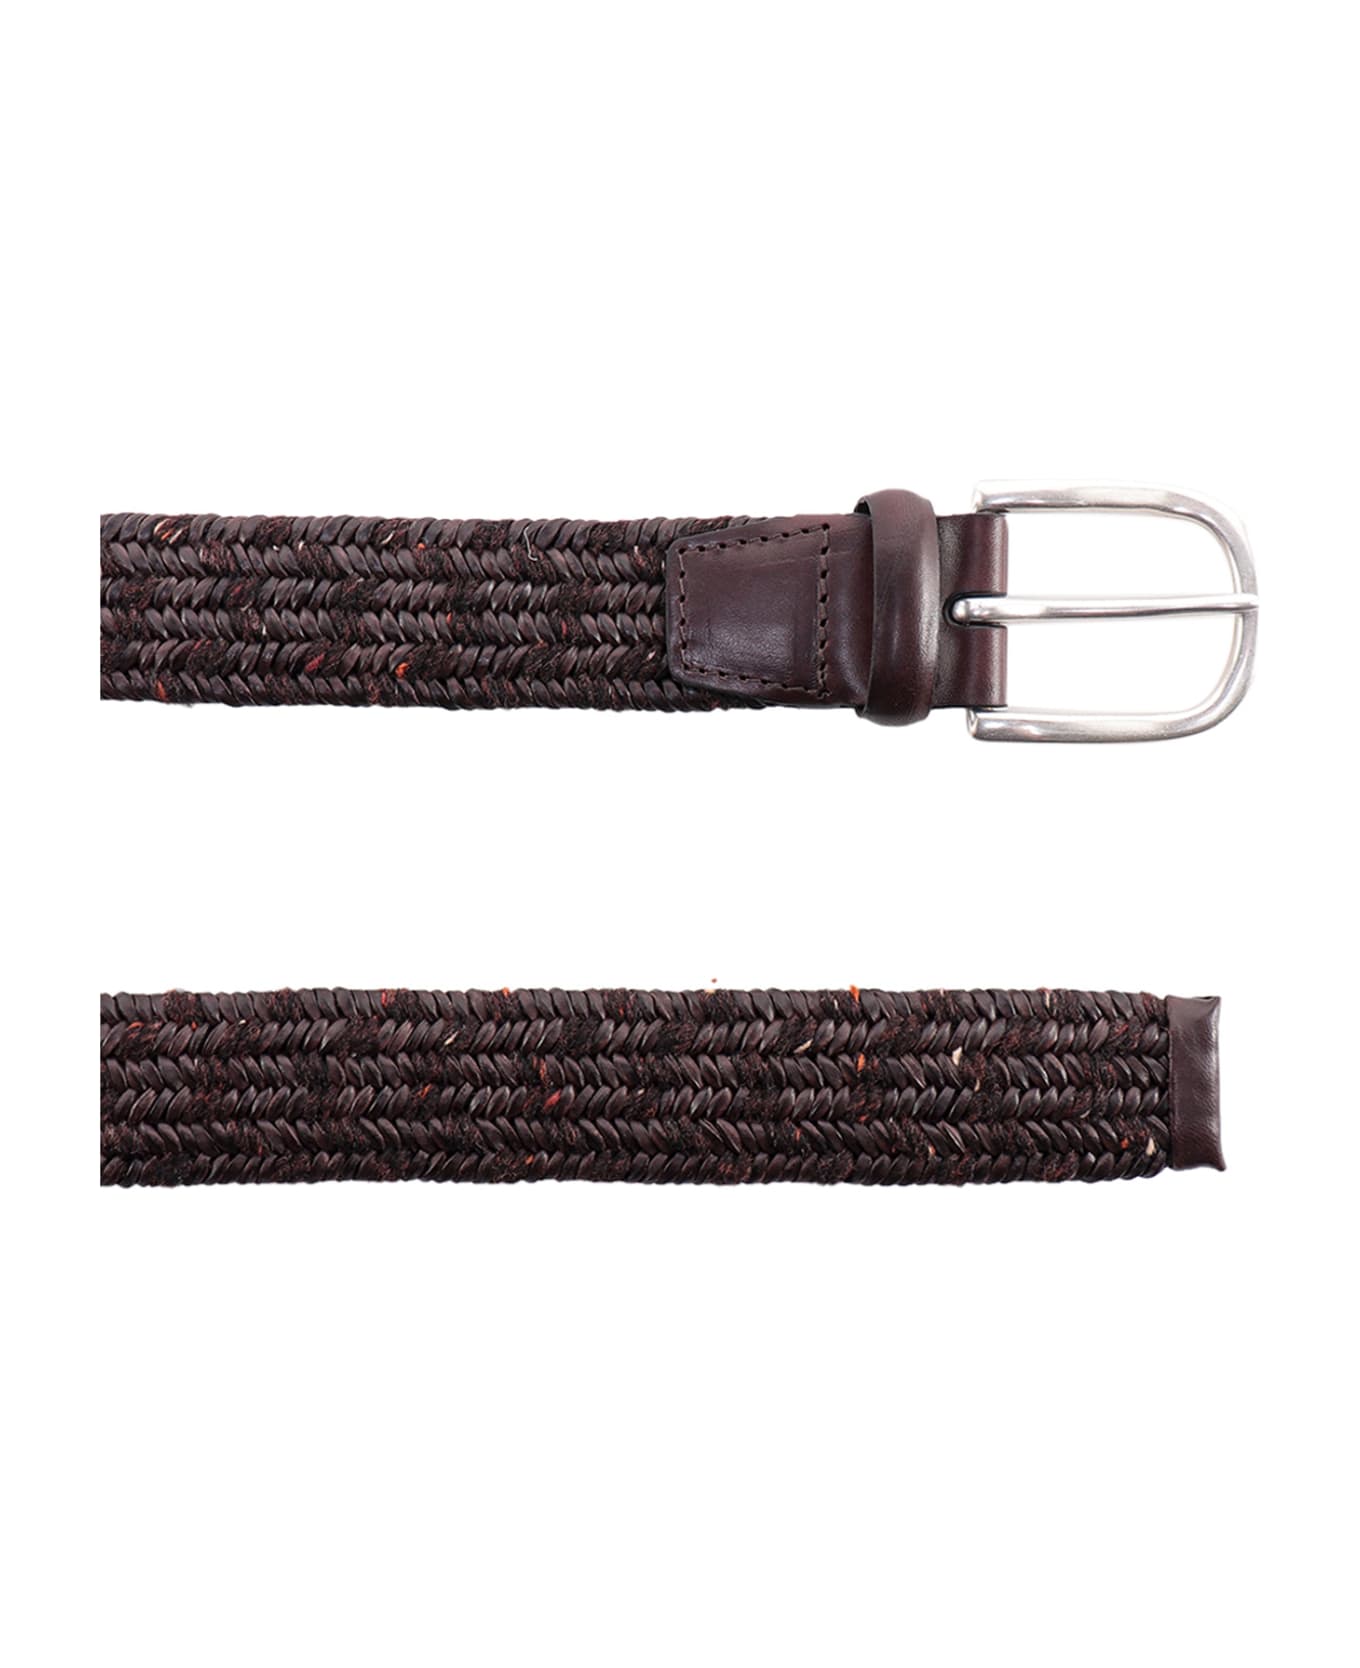 Orciani Belt Orciani - BROWN